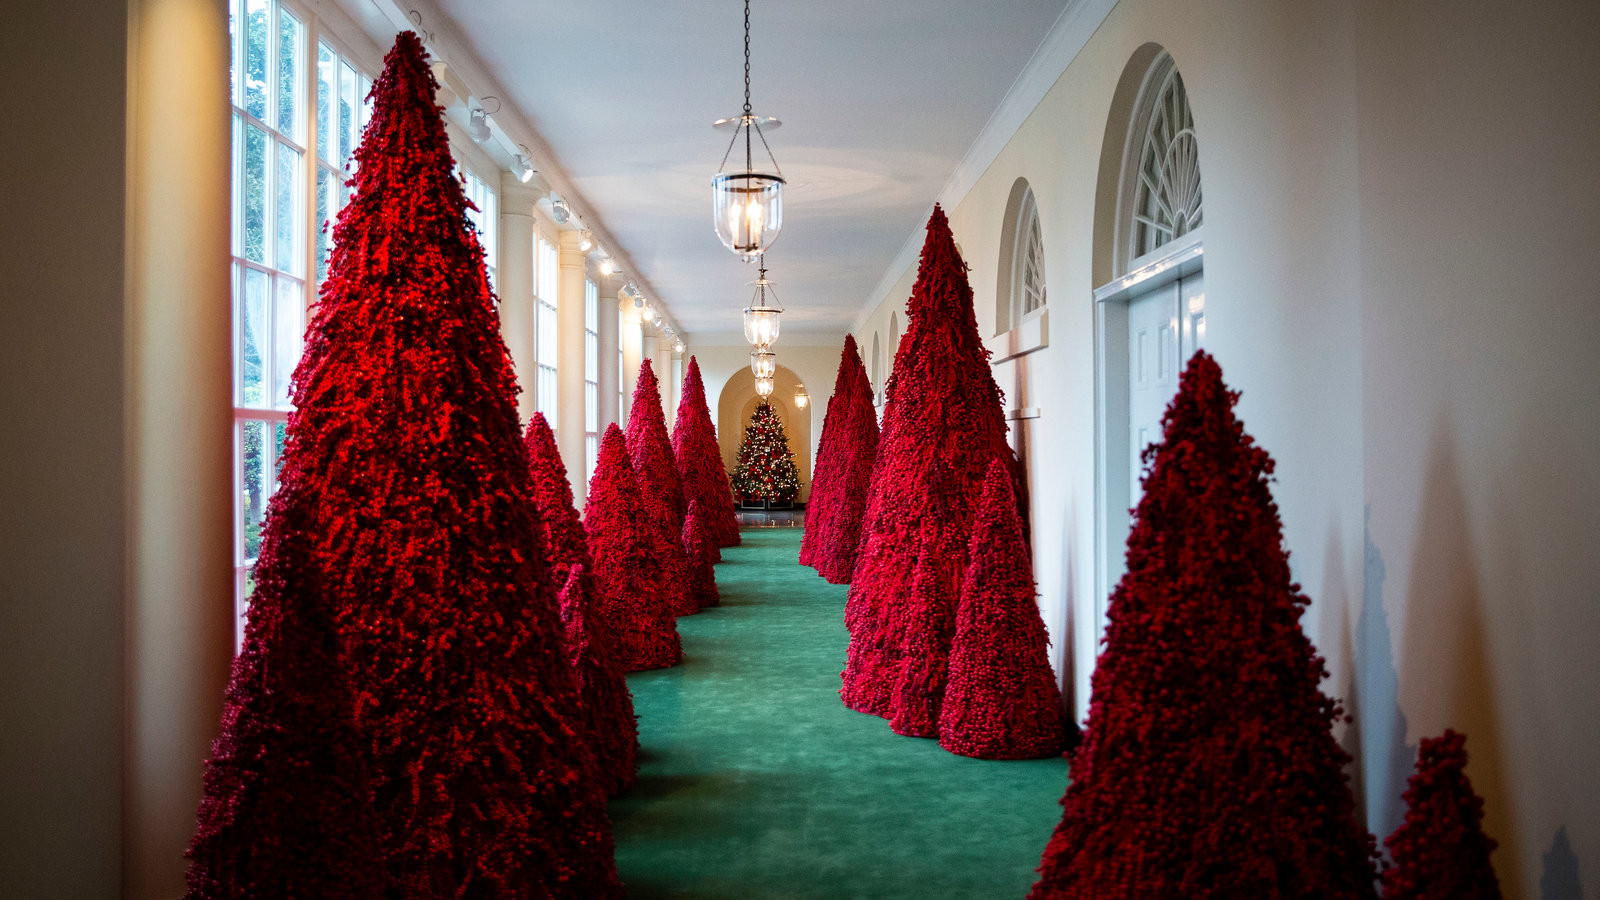 Whitehouse Christmas Tree Lighting 2019
 There Will Be Blood Red Trees The New York Times